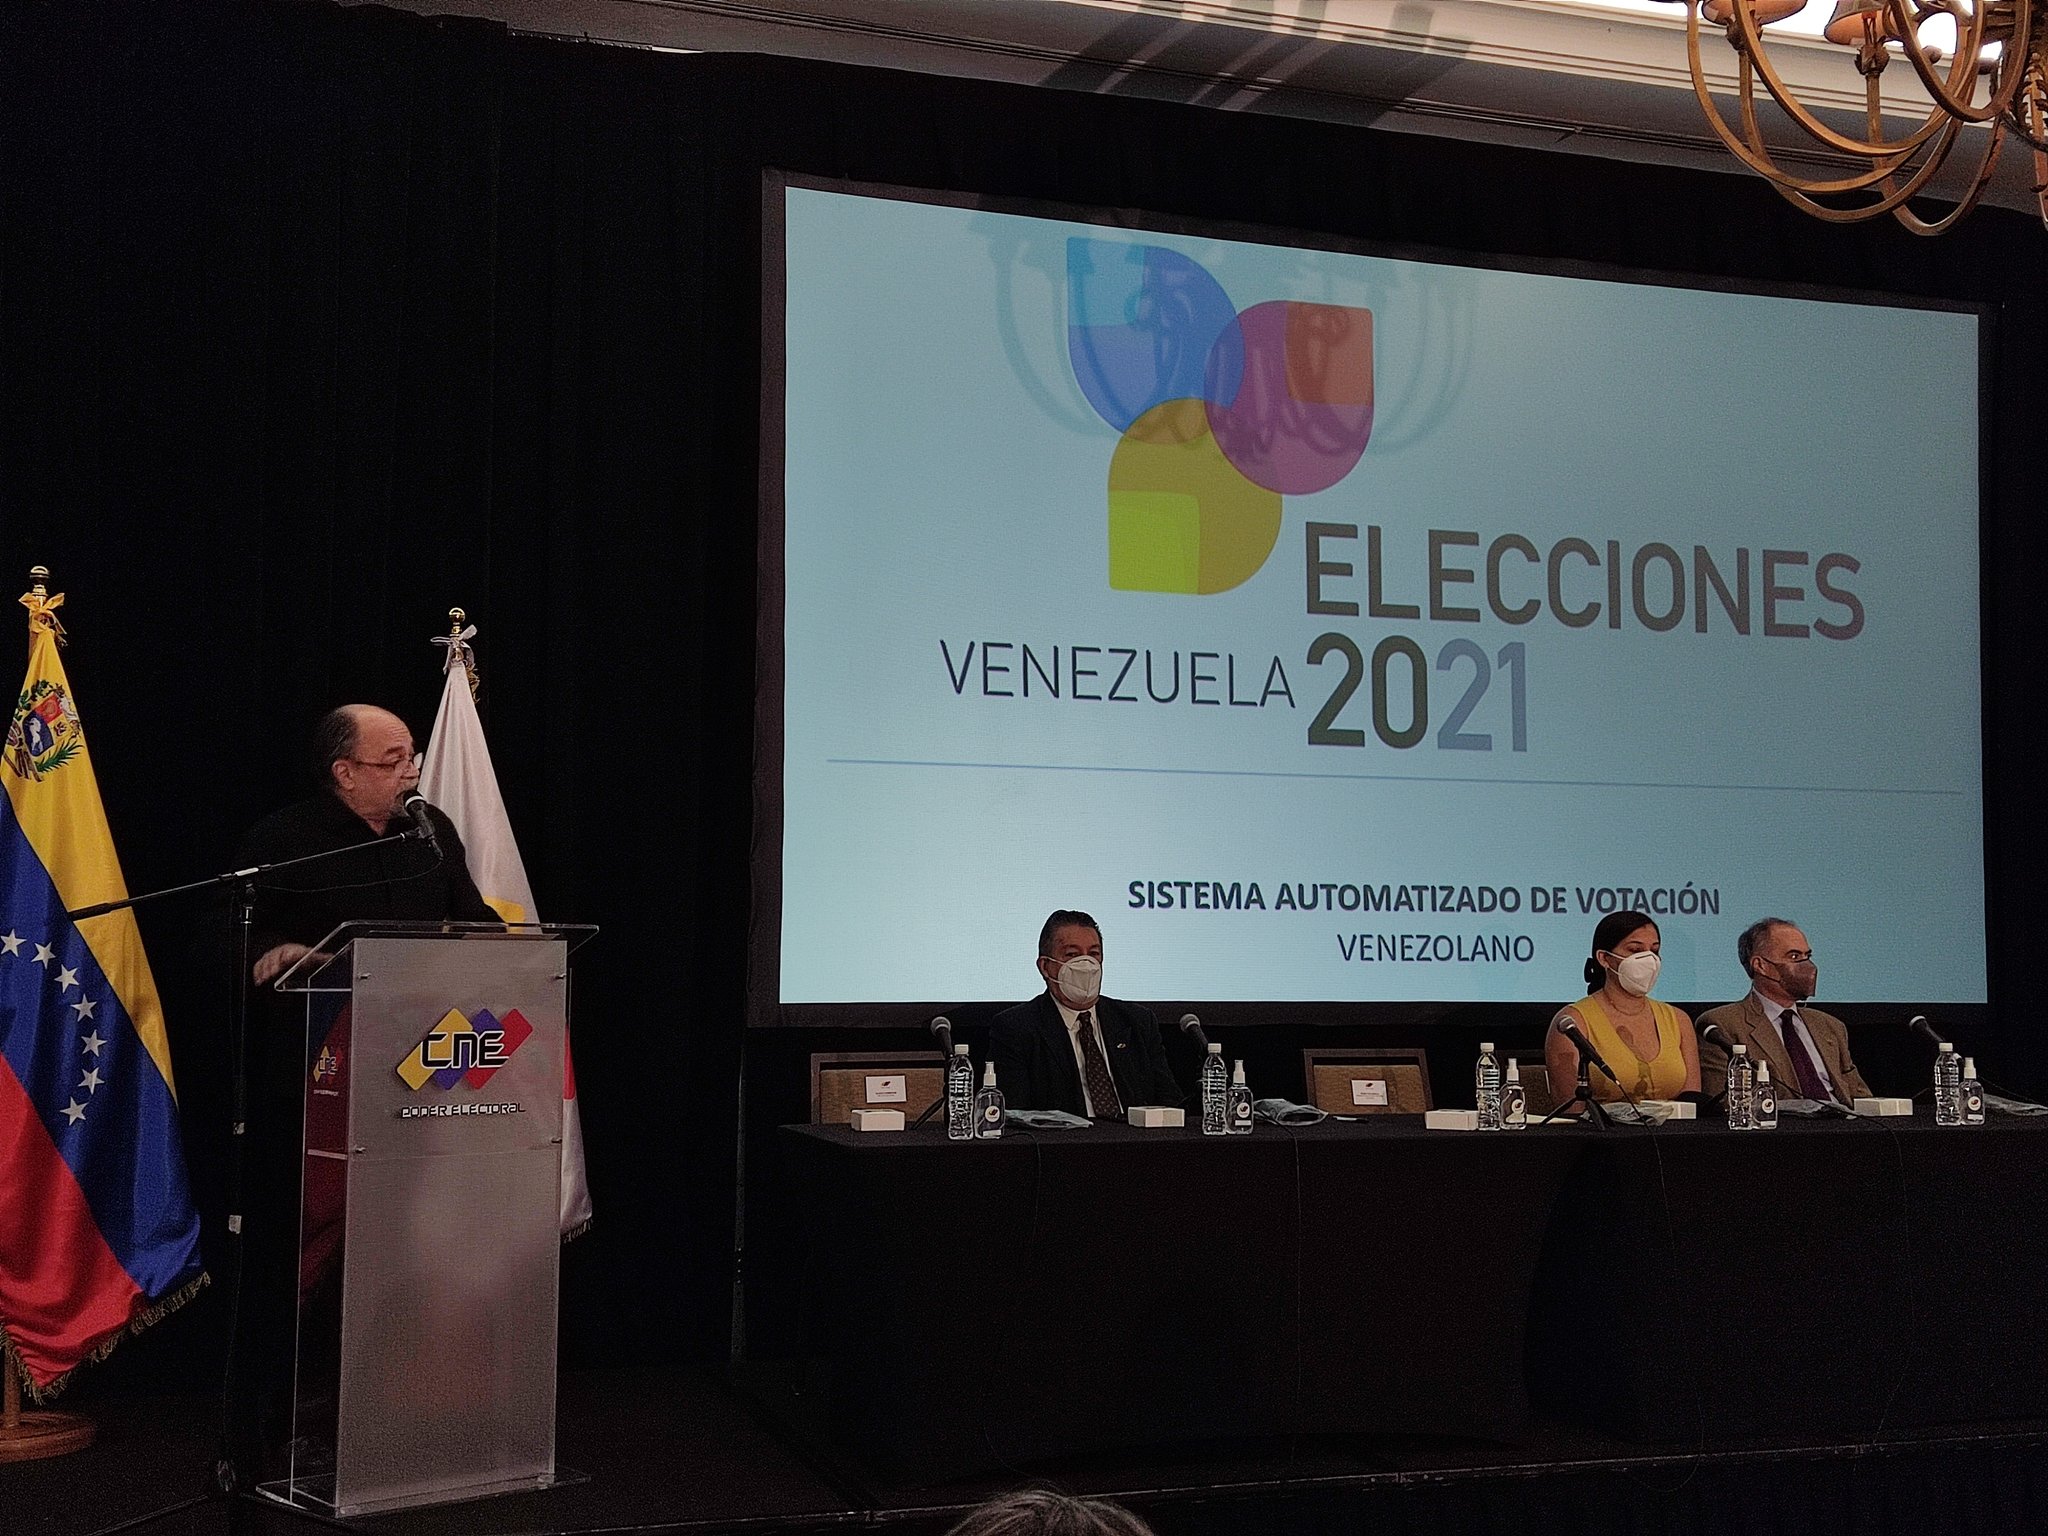 CNE's president Pedro Calzadilla speaking during his update on 21N regional elections. Photo by Twitter / @cneesvzla.